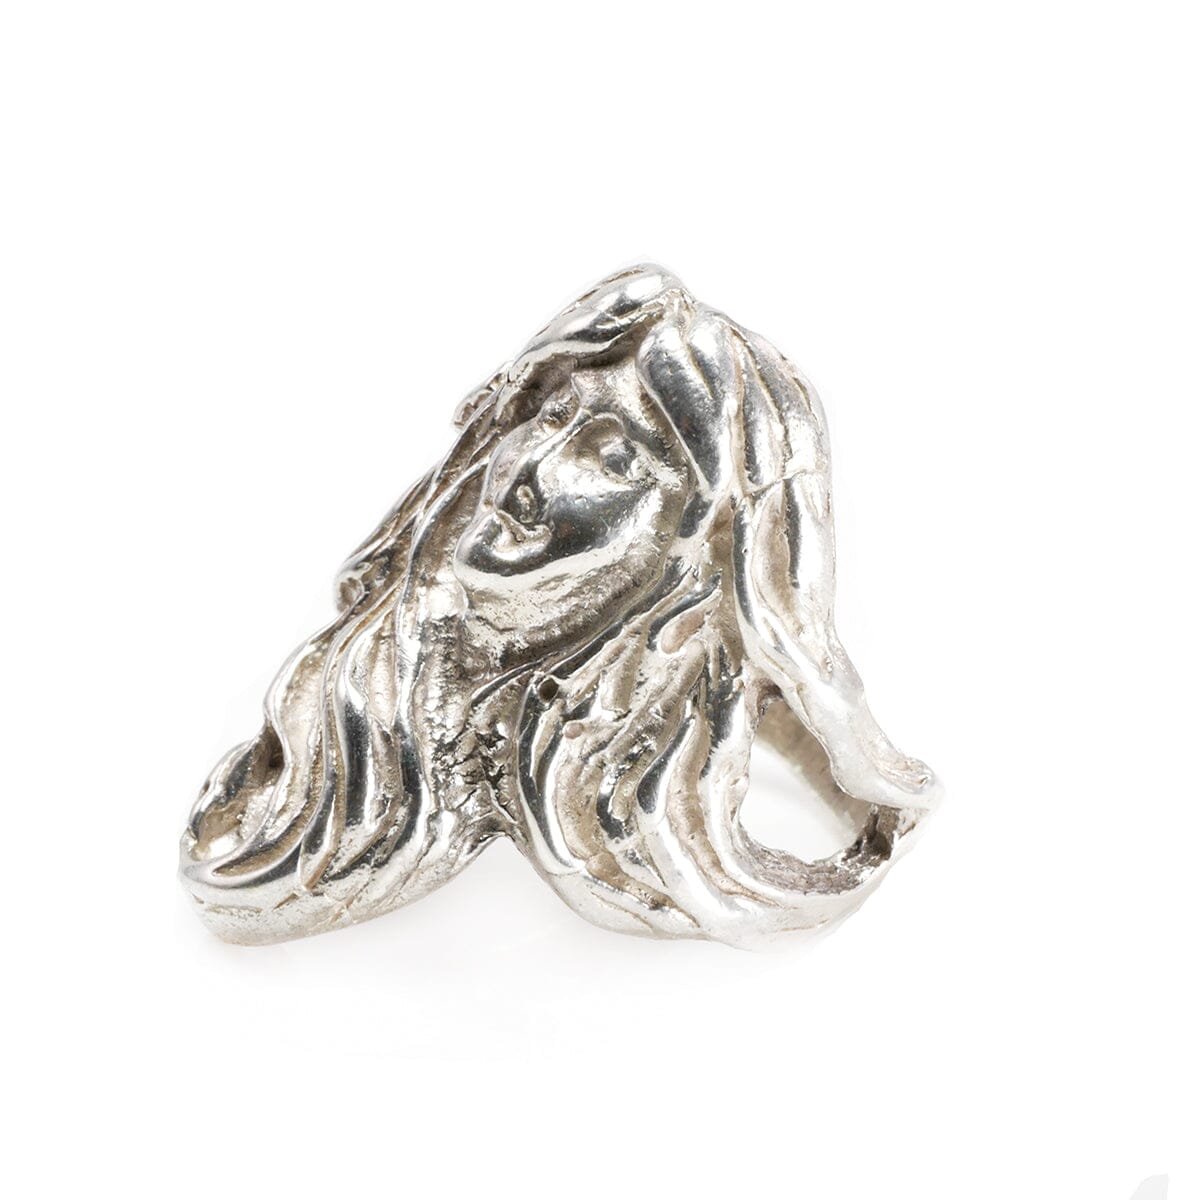 Great Lakes Boutique Handmade Fantasy Silver Ring #4